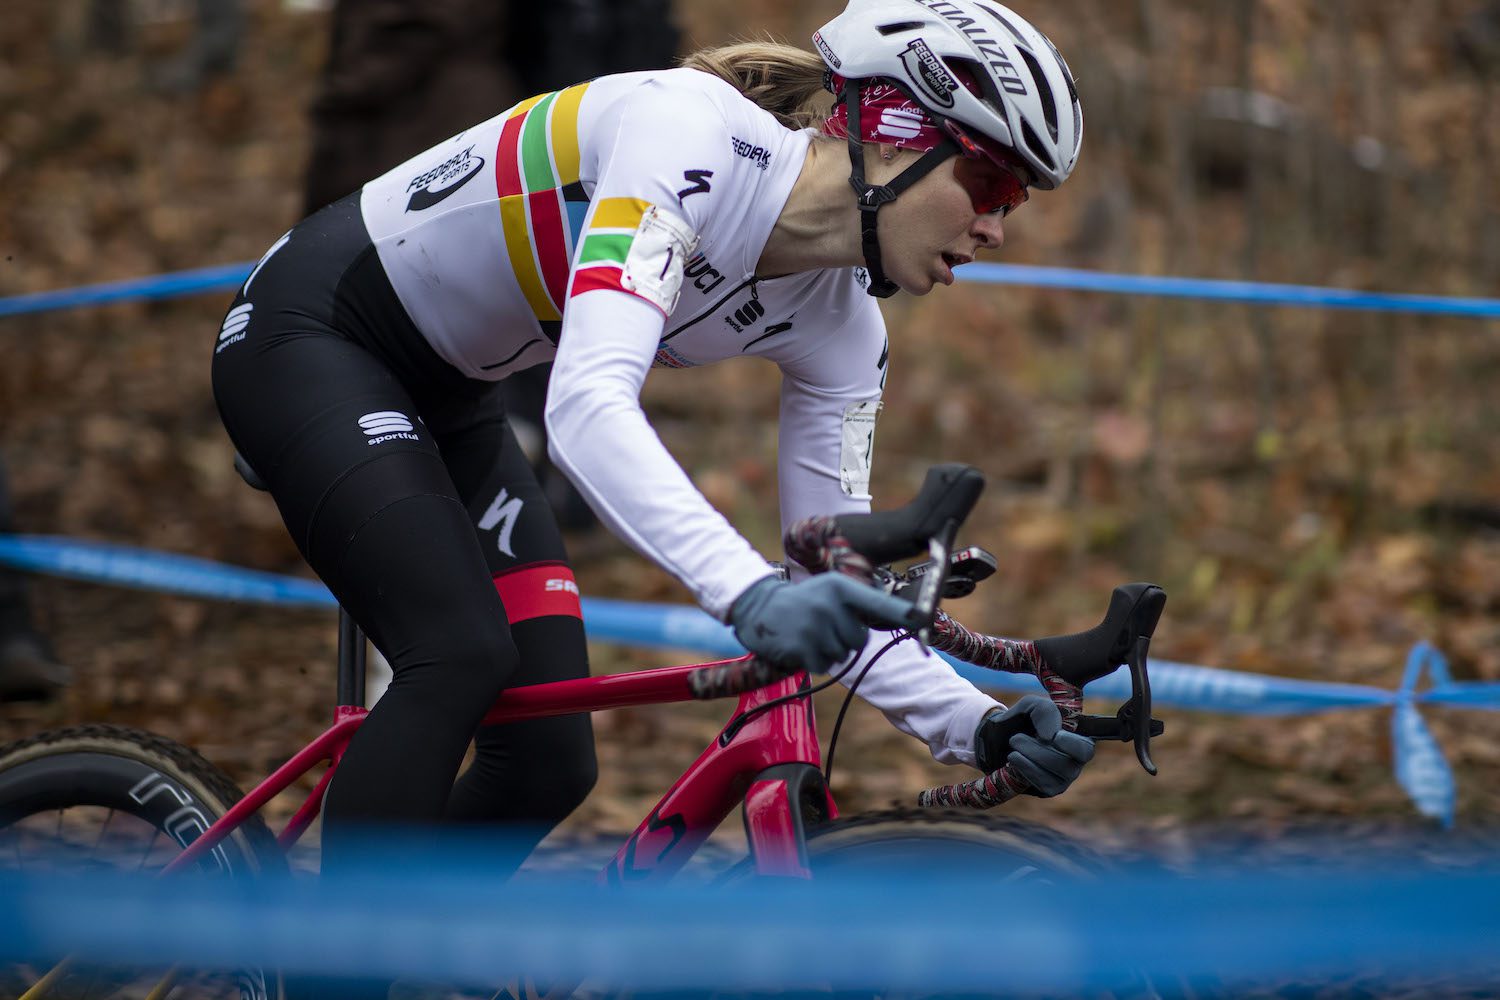 Rochette eighth in final 2019-2020 World Cup, finishes sixth overall ...